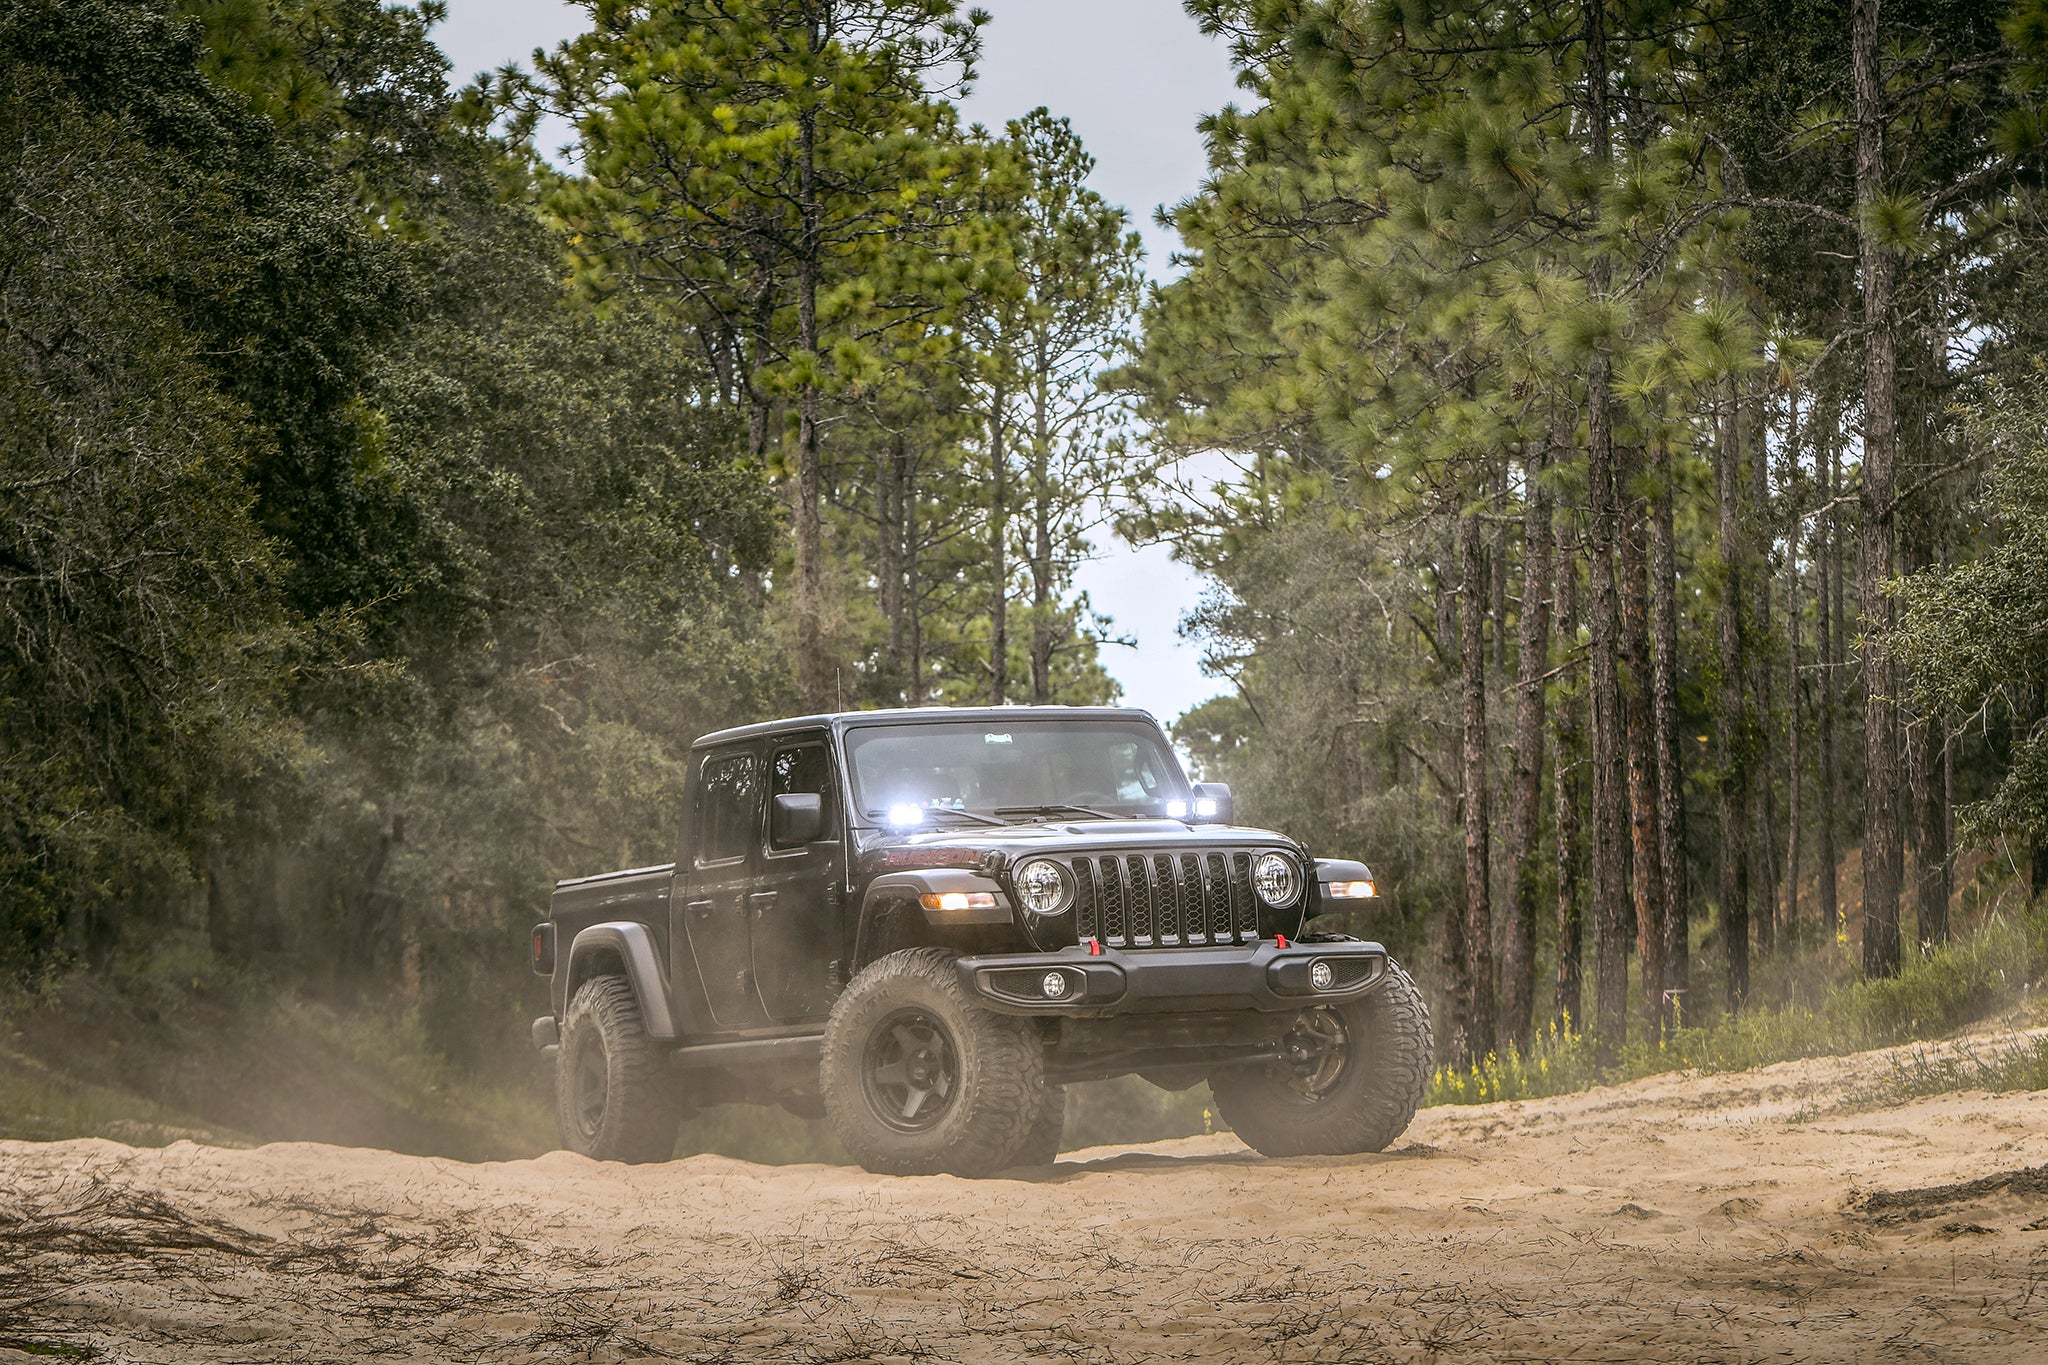 overland sector wheels jeep gladiator rubicon on 17x9 satin black atlas wheels in woods on dirt trail